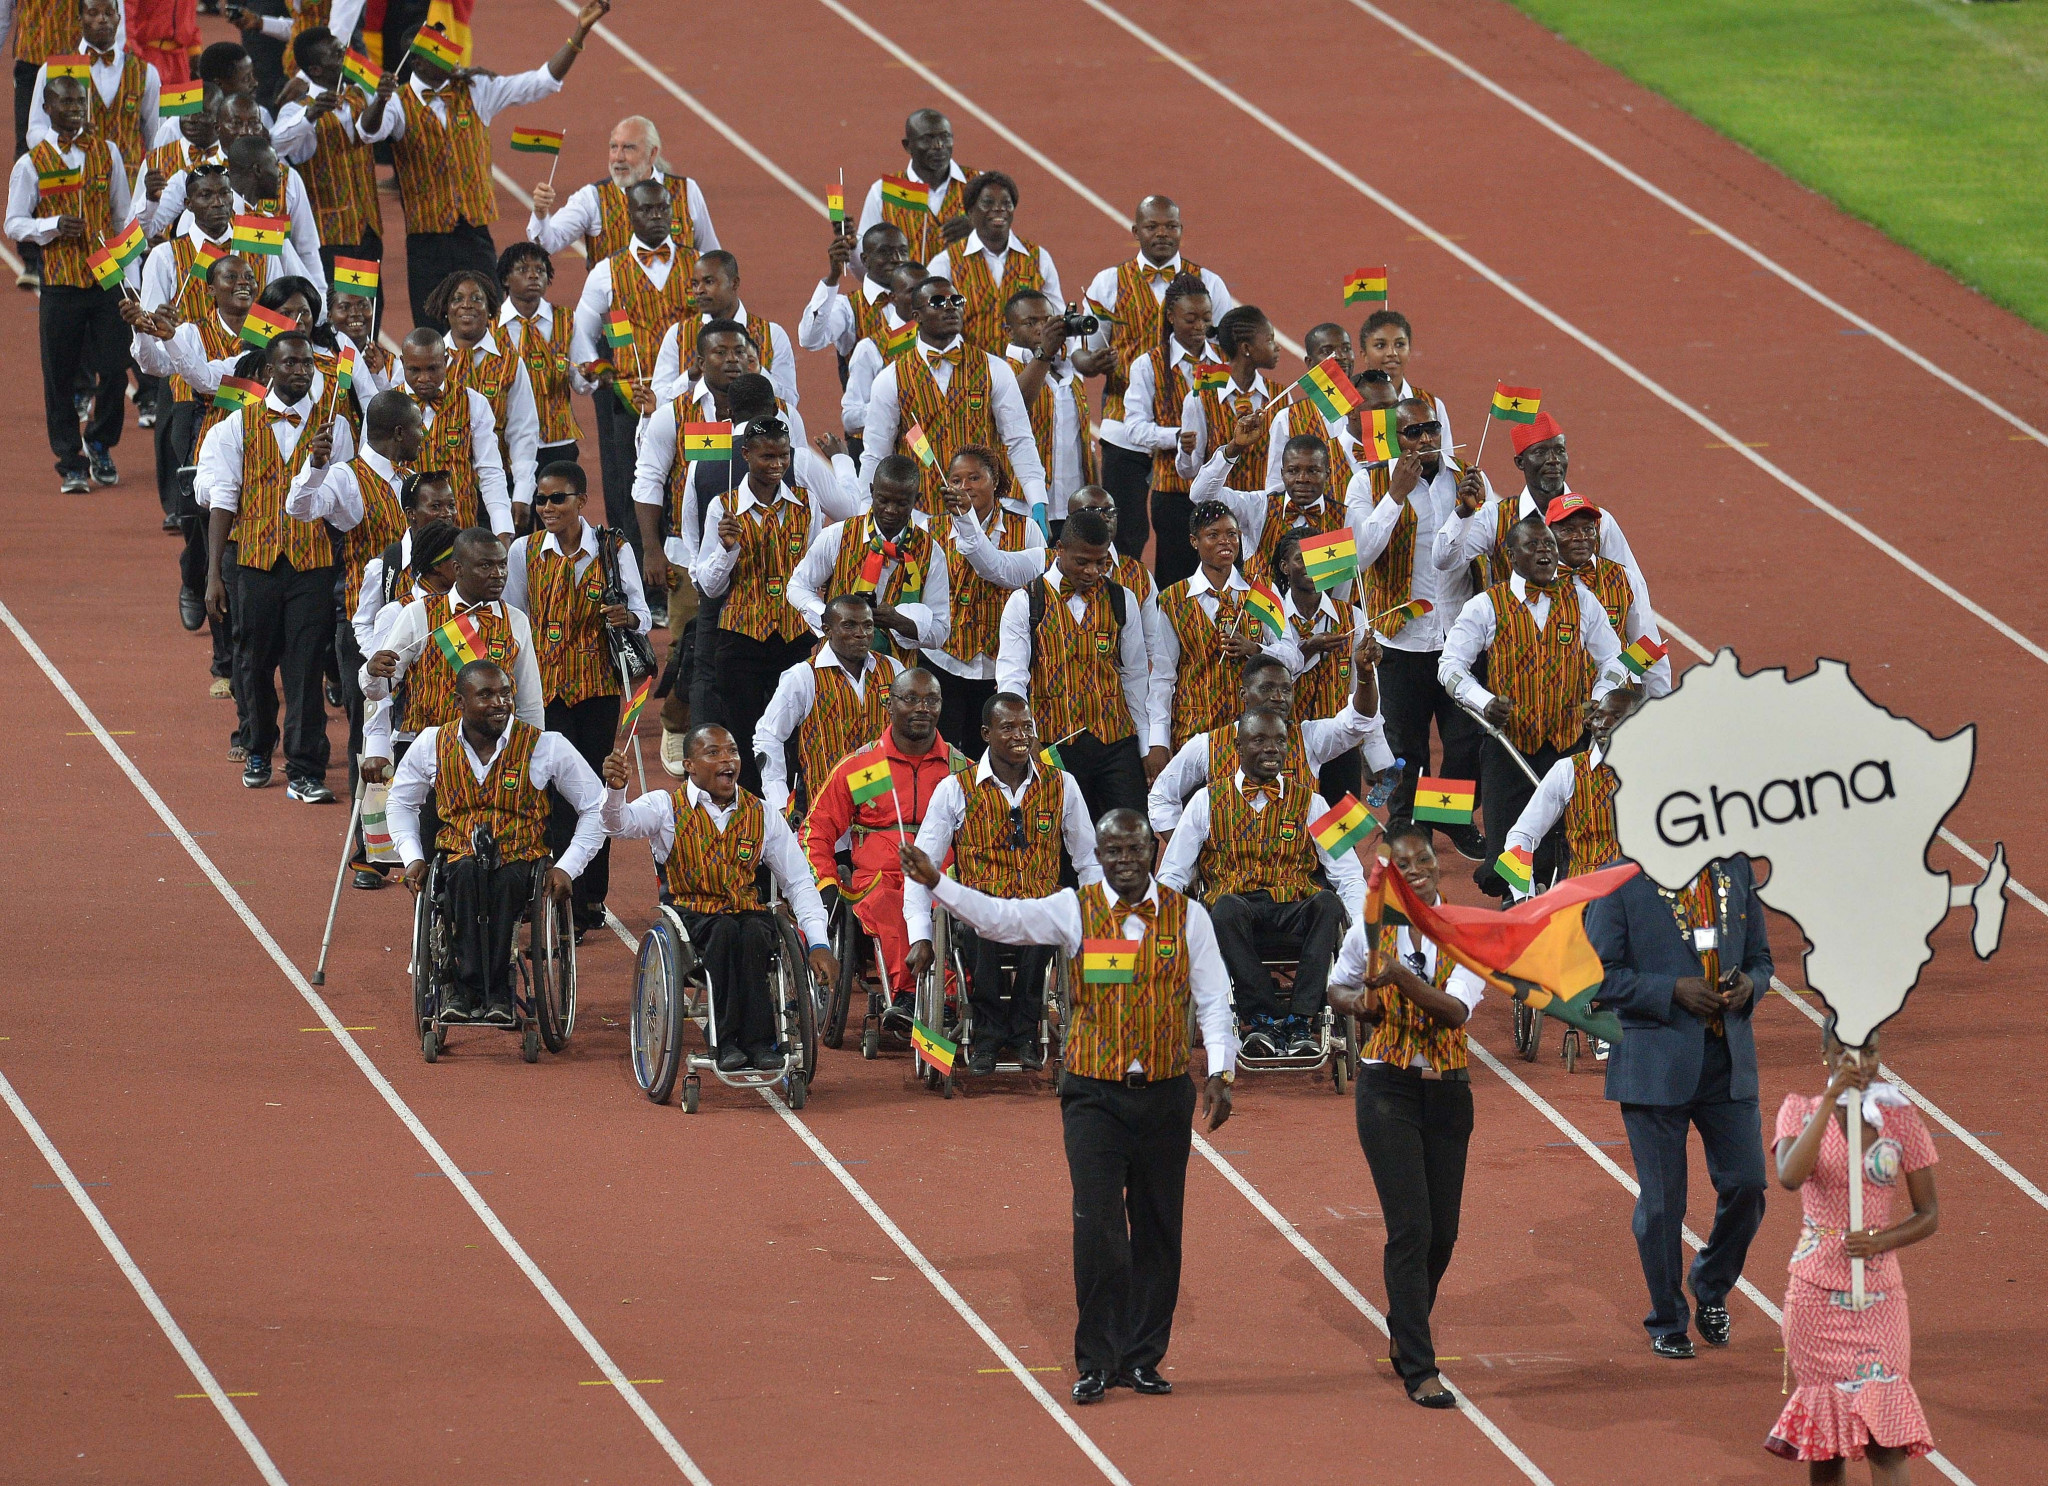 Ghana is due to host the African Games for the first time next year, after it was delayed because of economic pressures and delays in preparations ©Getty Images